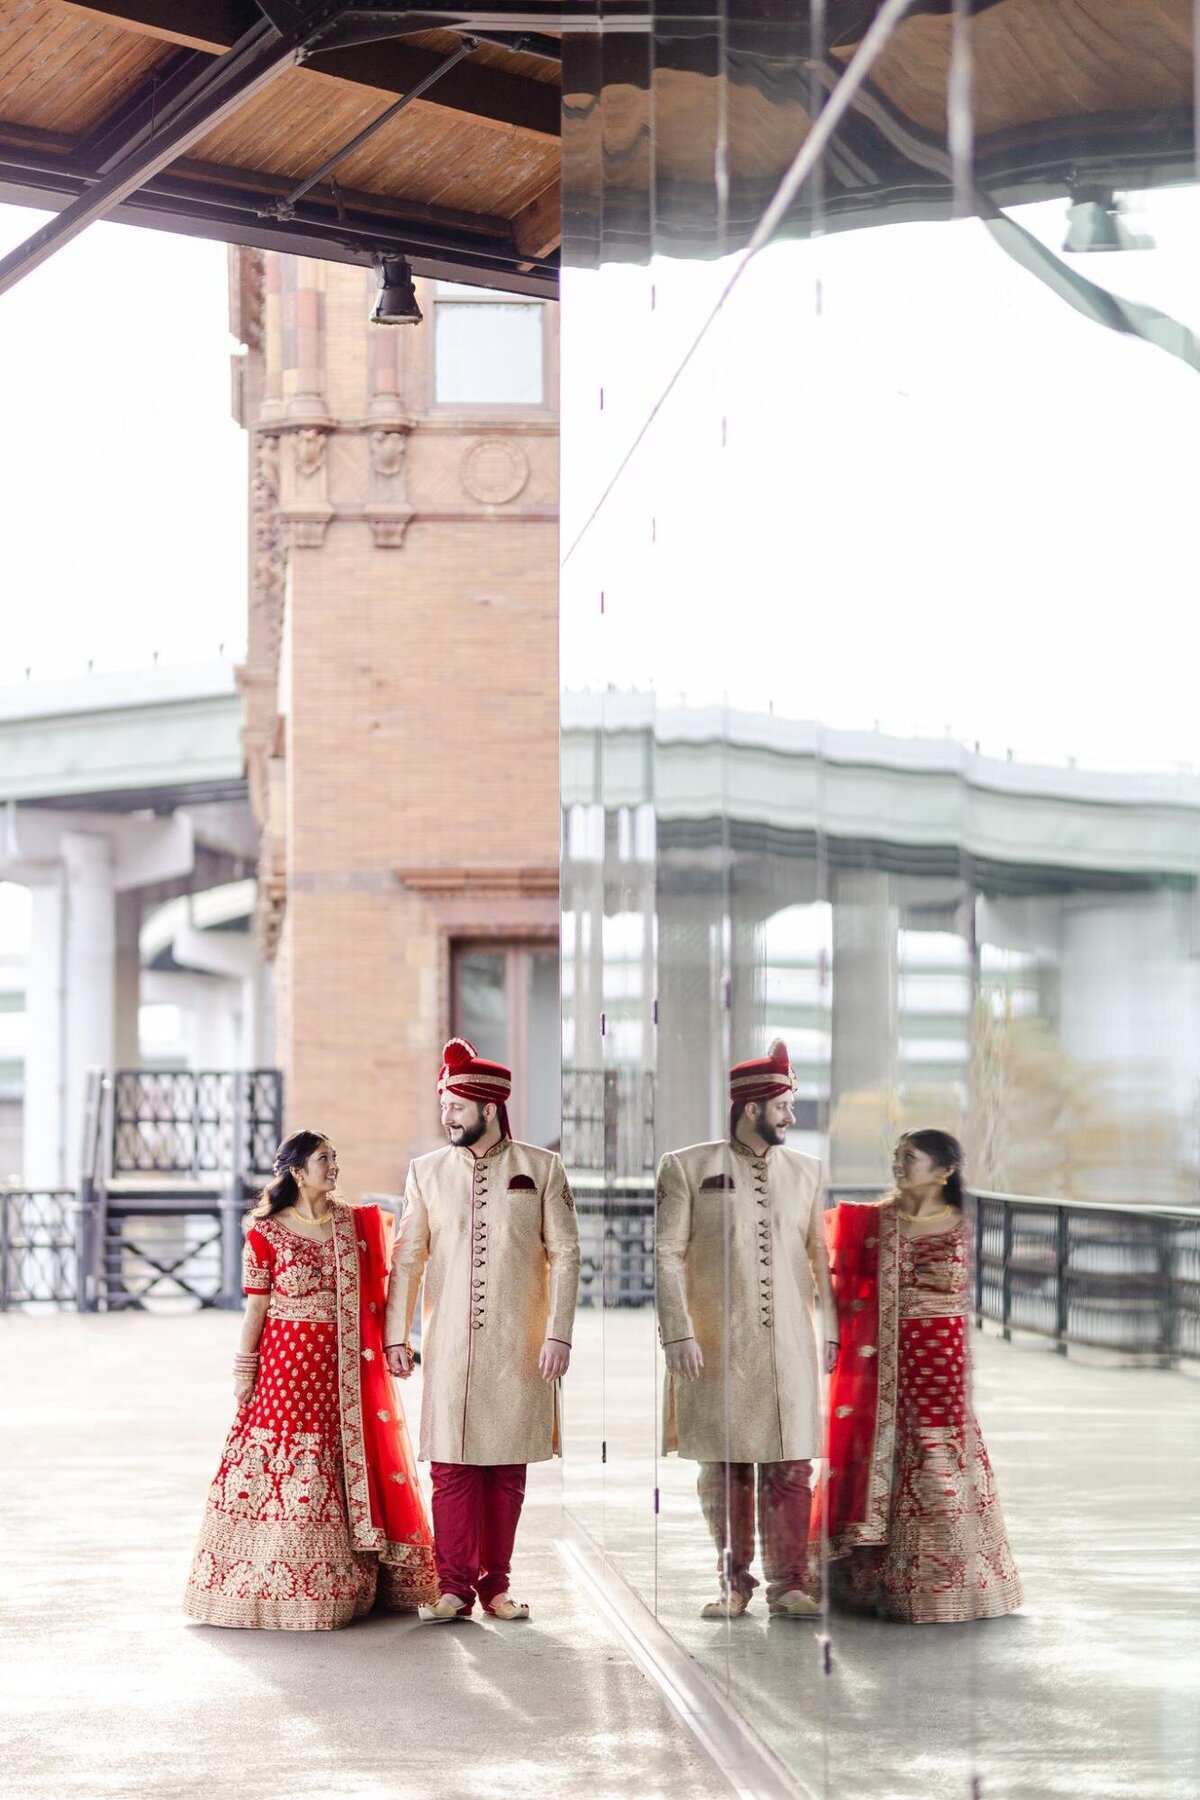 A couple in traditional south asian wedding attire standing under a covered pavilion, reflected in a vertical mirror.